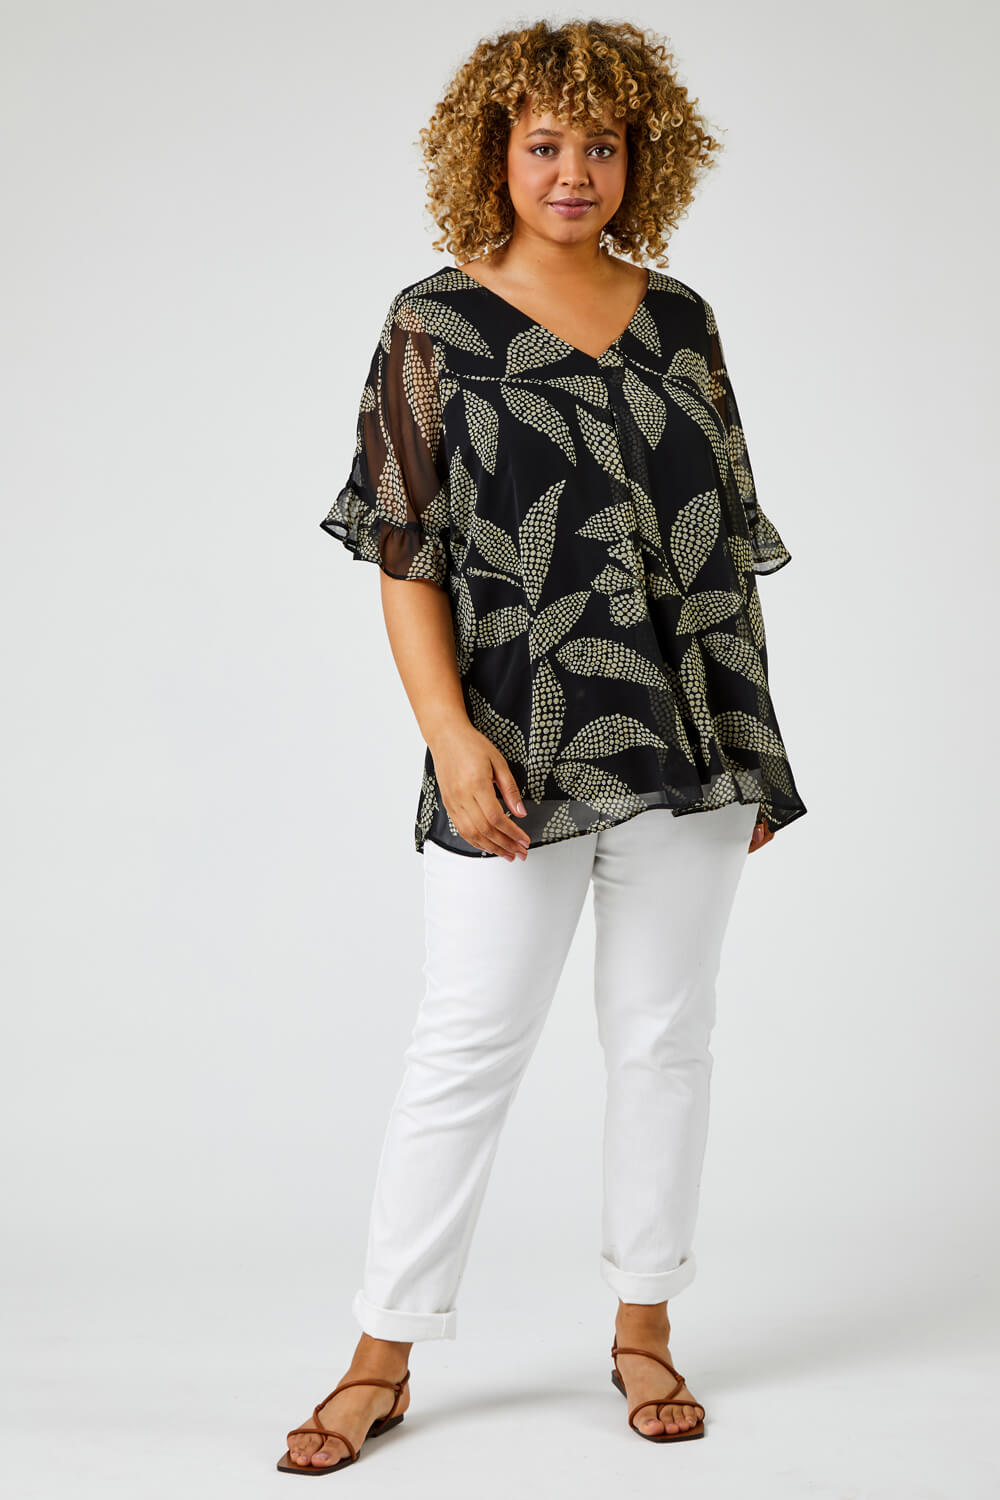 Black Curve Abstract Leaf Print Chiffon Overlay Top, Image 5 of 6